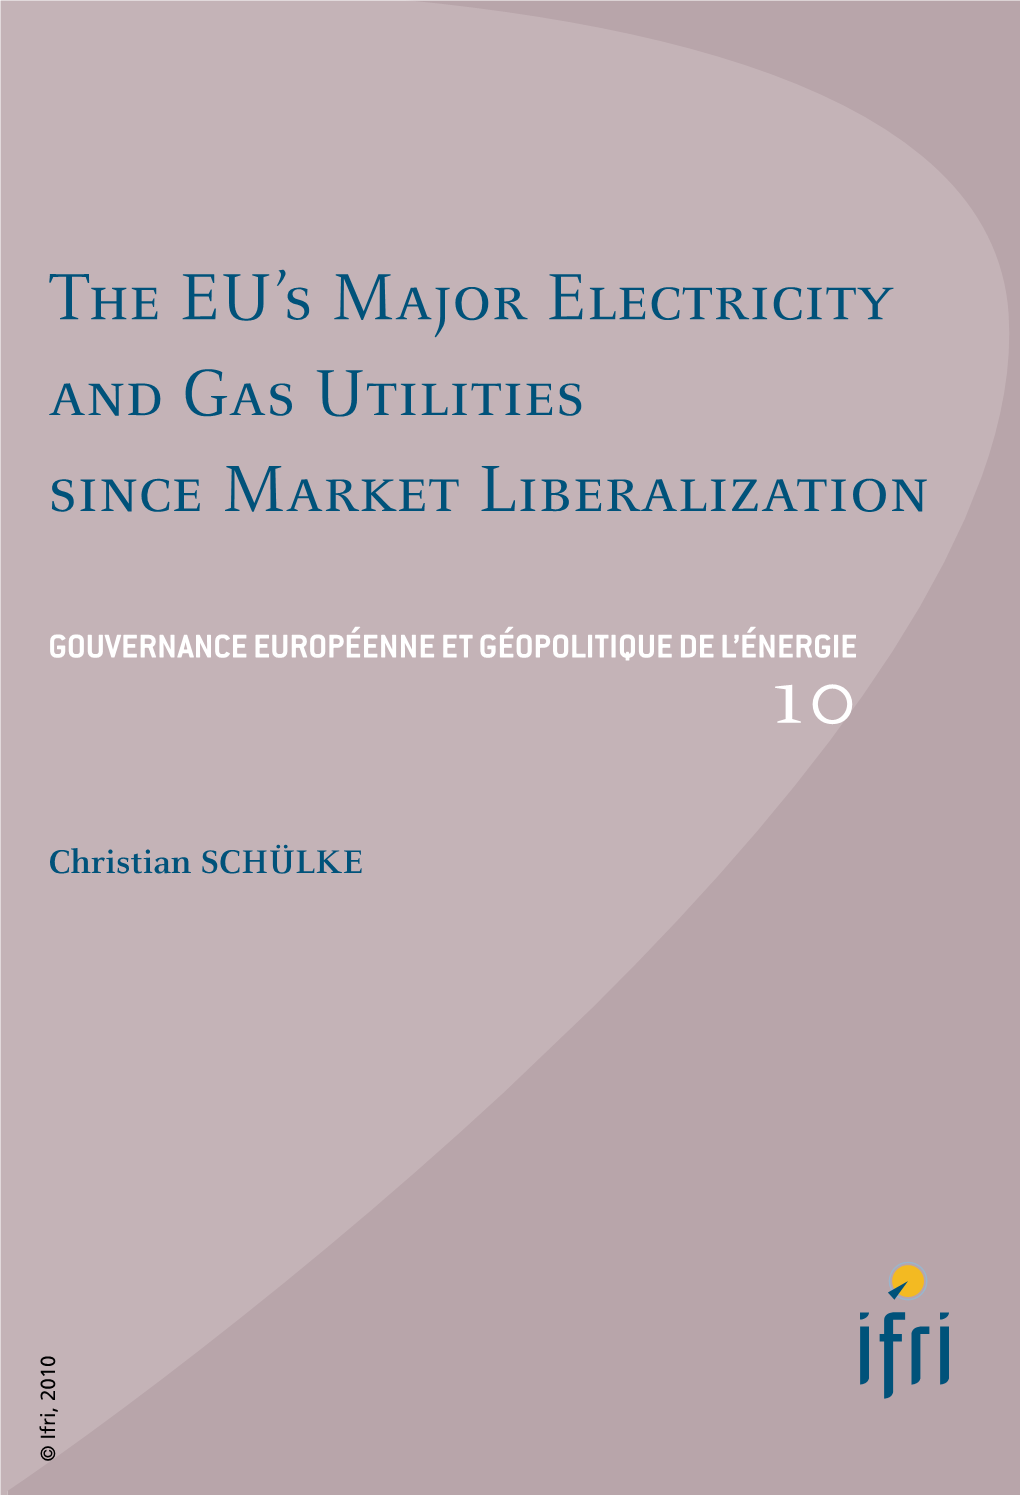 The EU's Major Electricity and Gas Utilities Since Market Liberalization